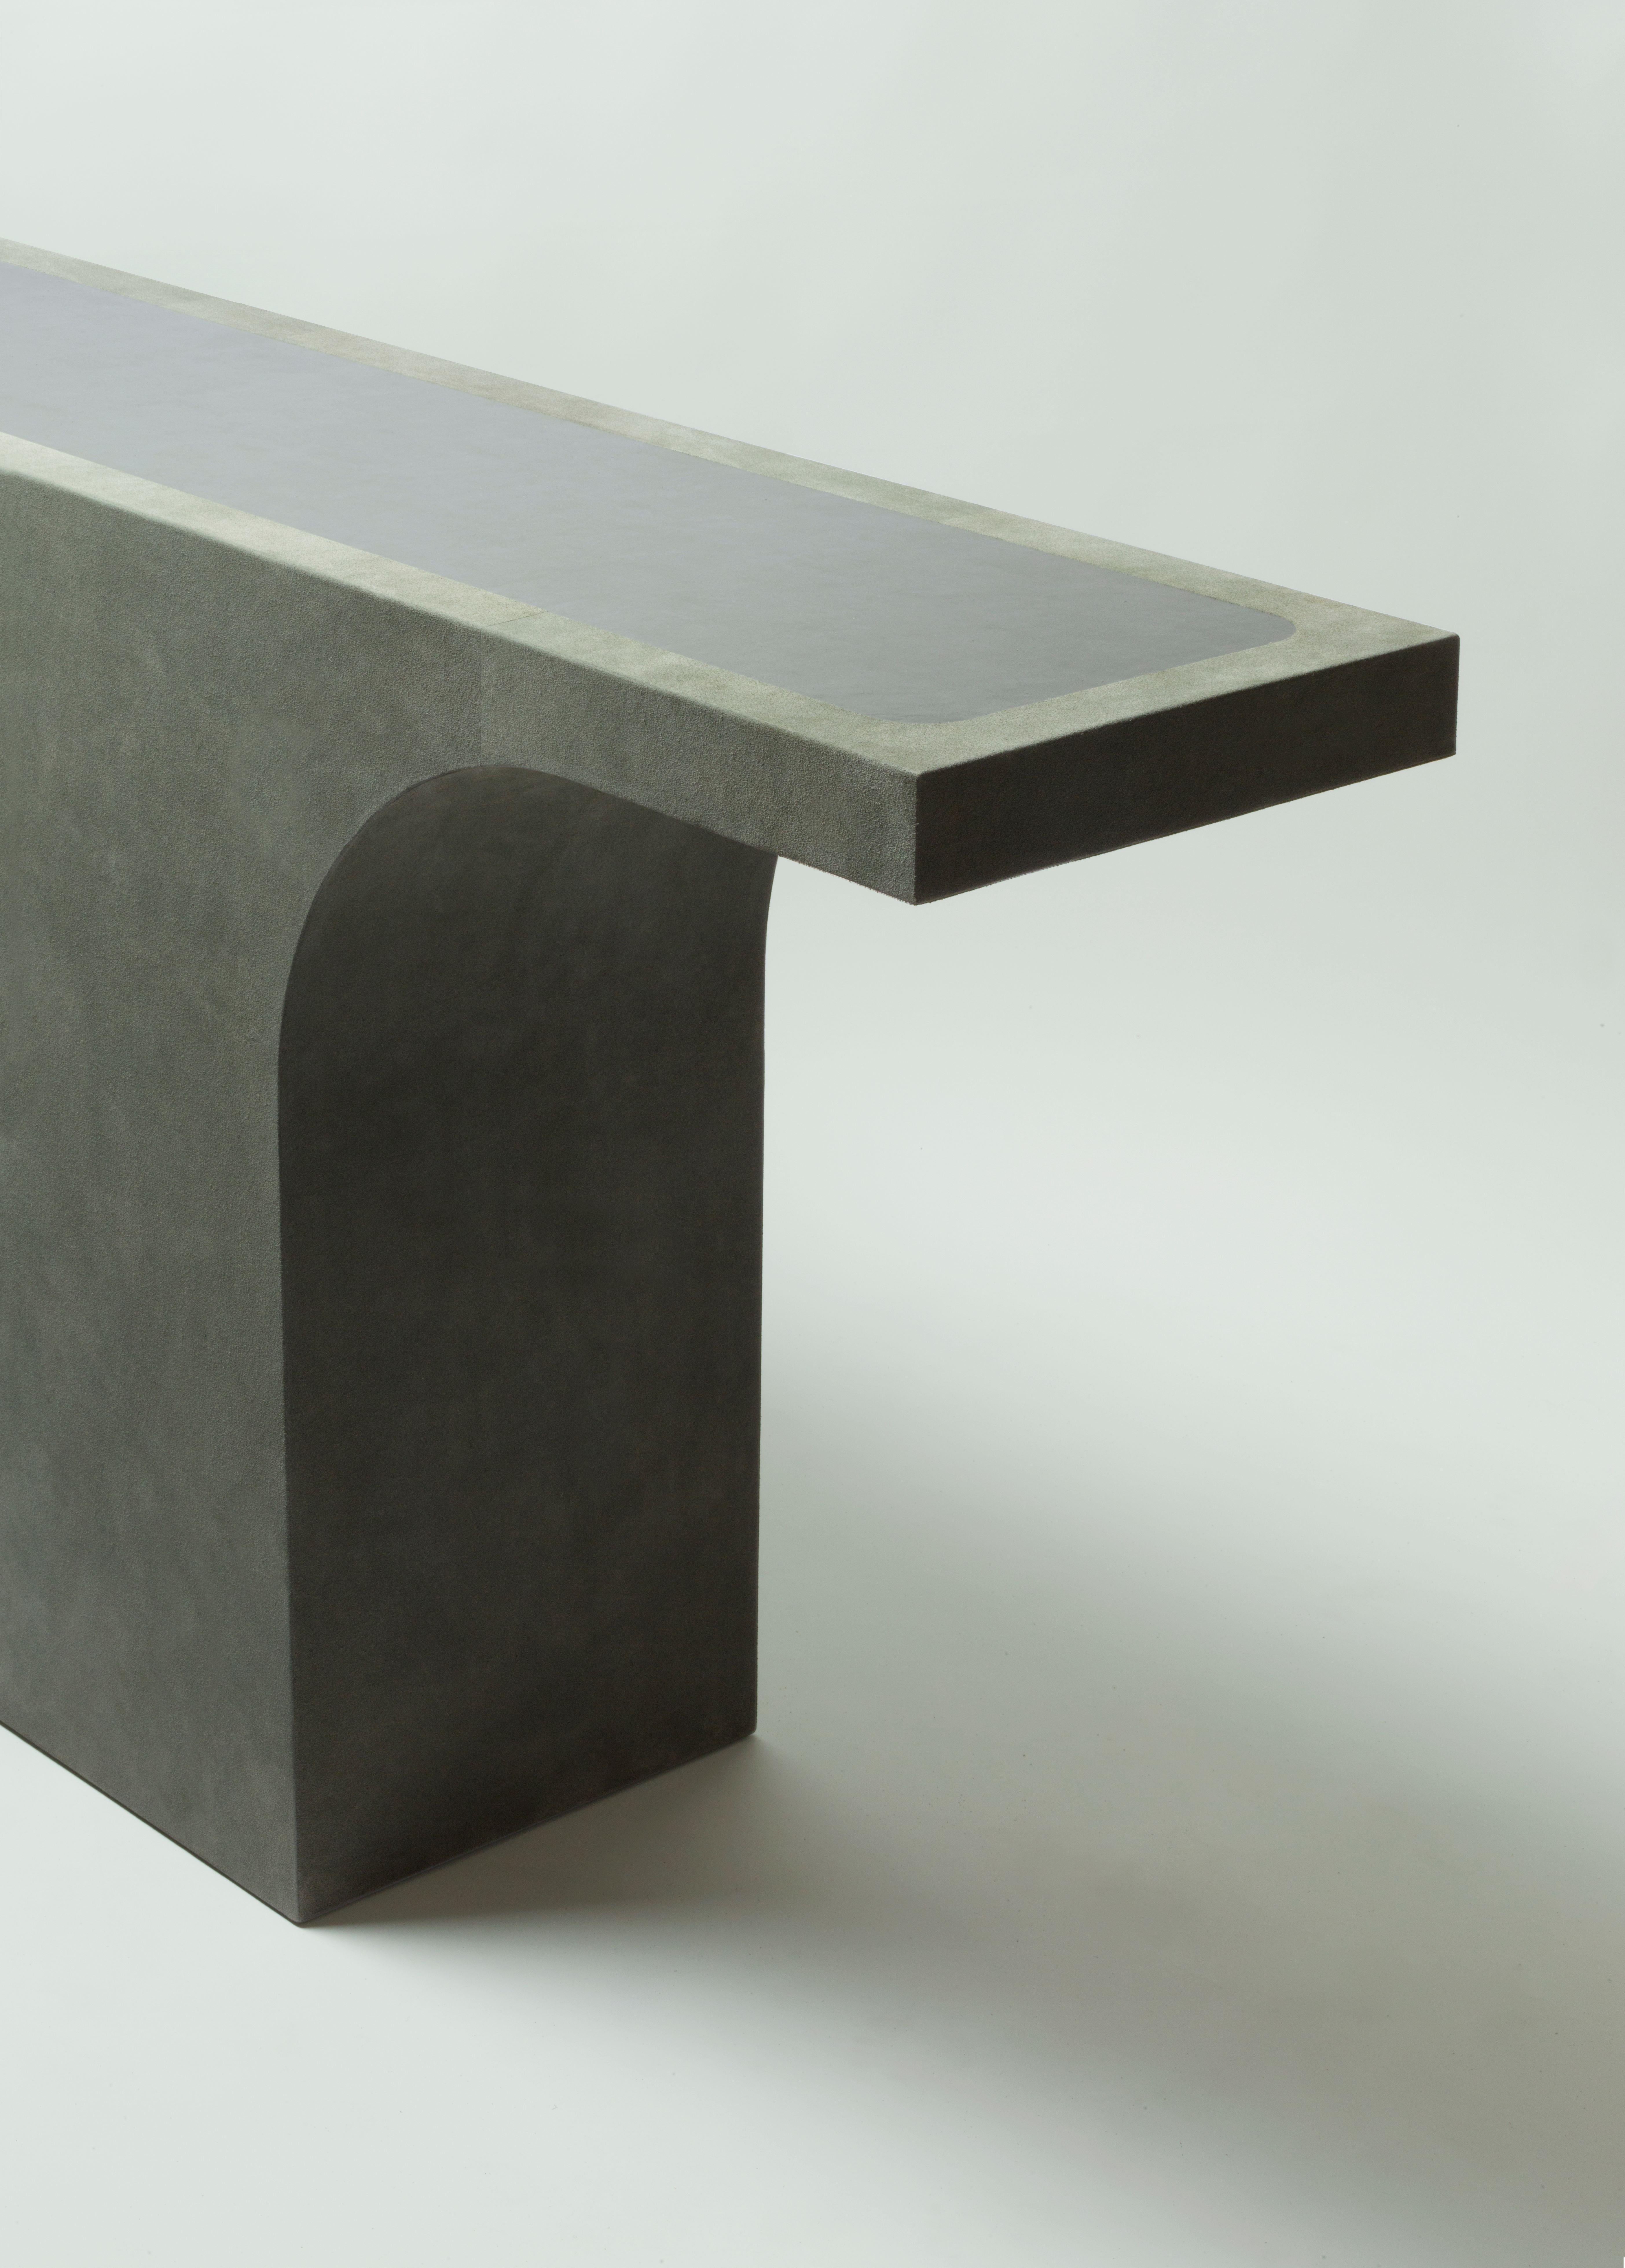 Novare Console -- Francesco Balzano x Giobagnara

Available in a suede with calfskin nappa top finish. Pictured here is the console in A69 Sage suede finish for the base and H37 Light Grey nappa finish for the top.

For simple and sophisticated